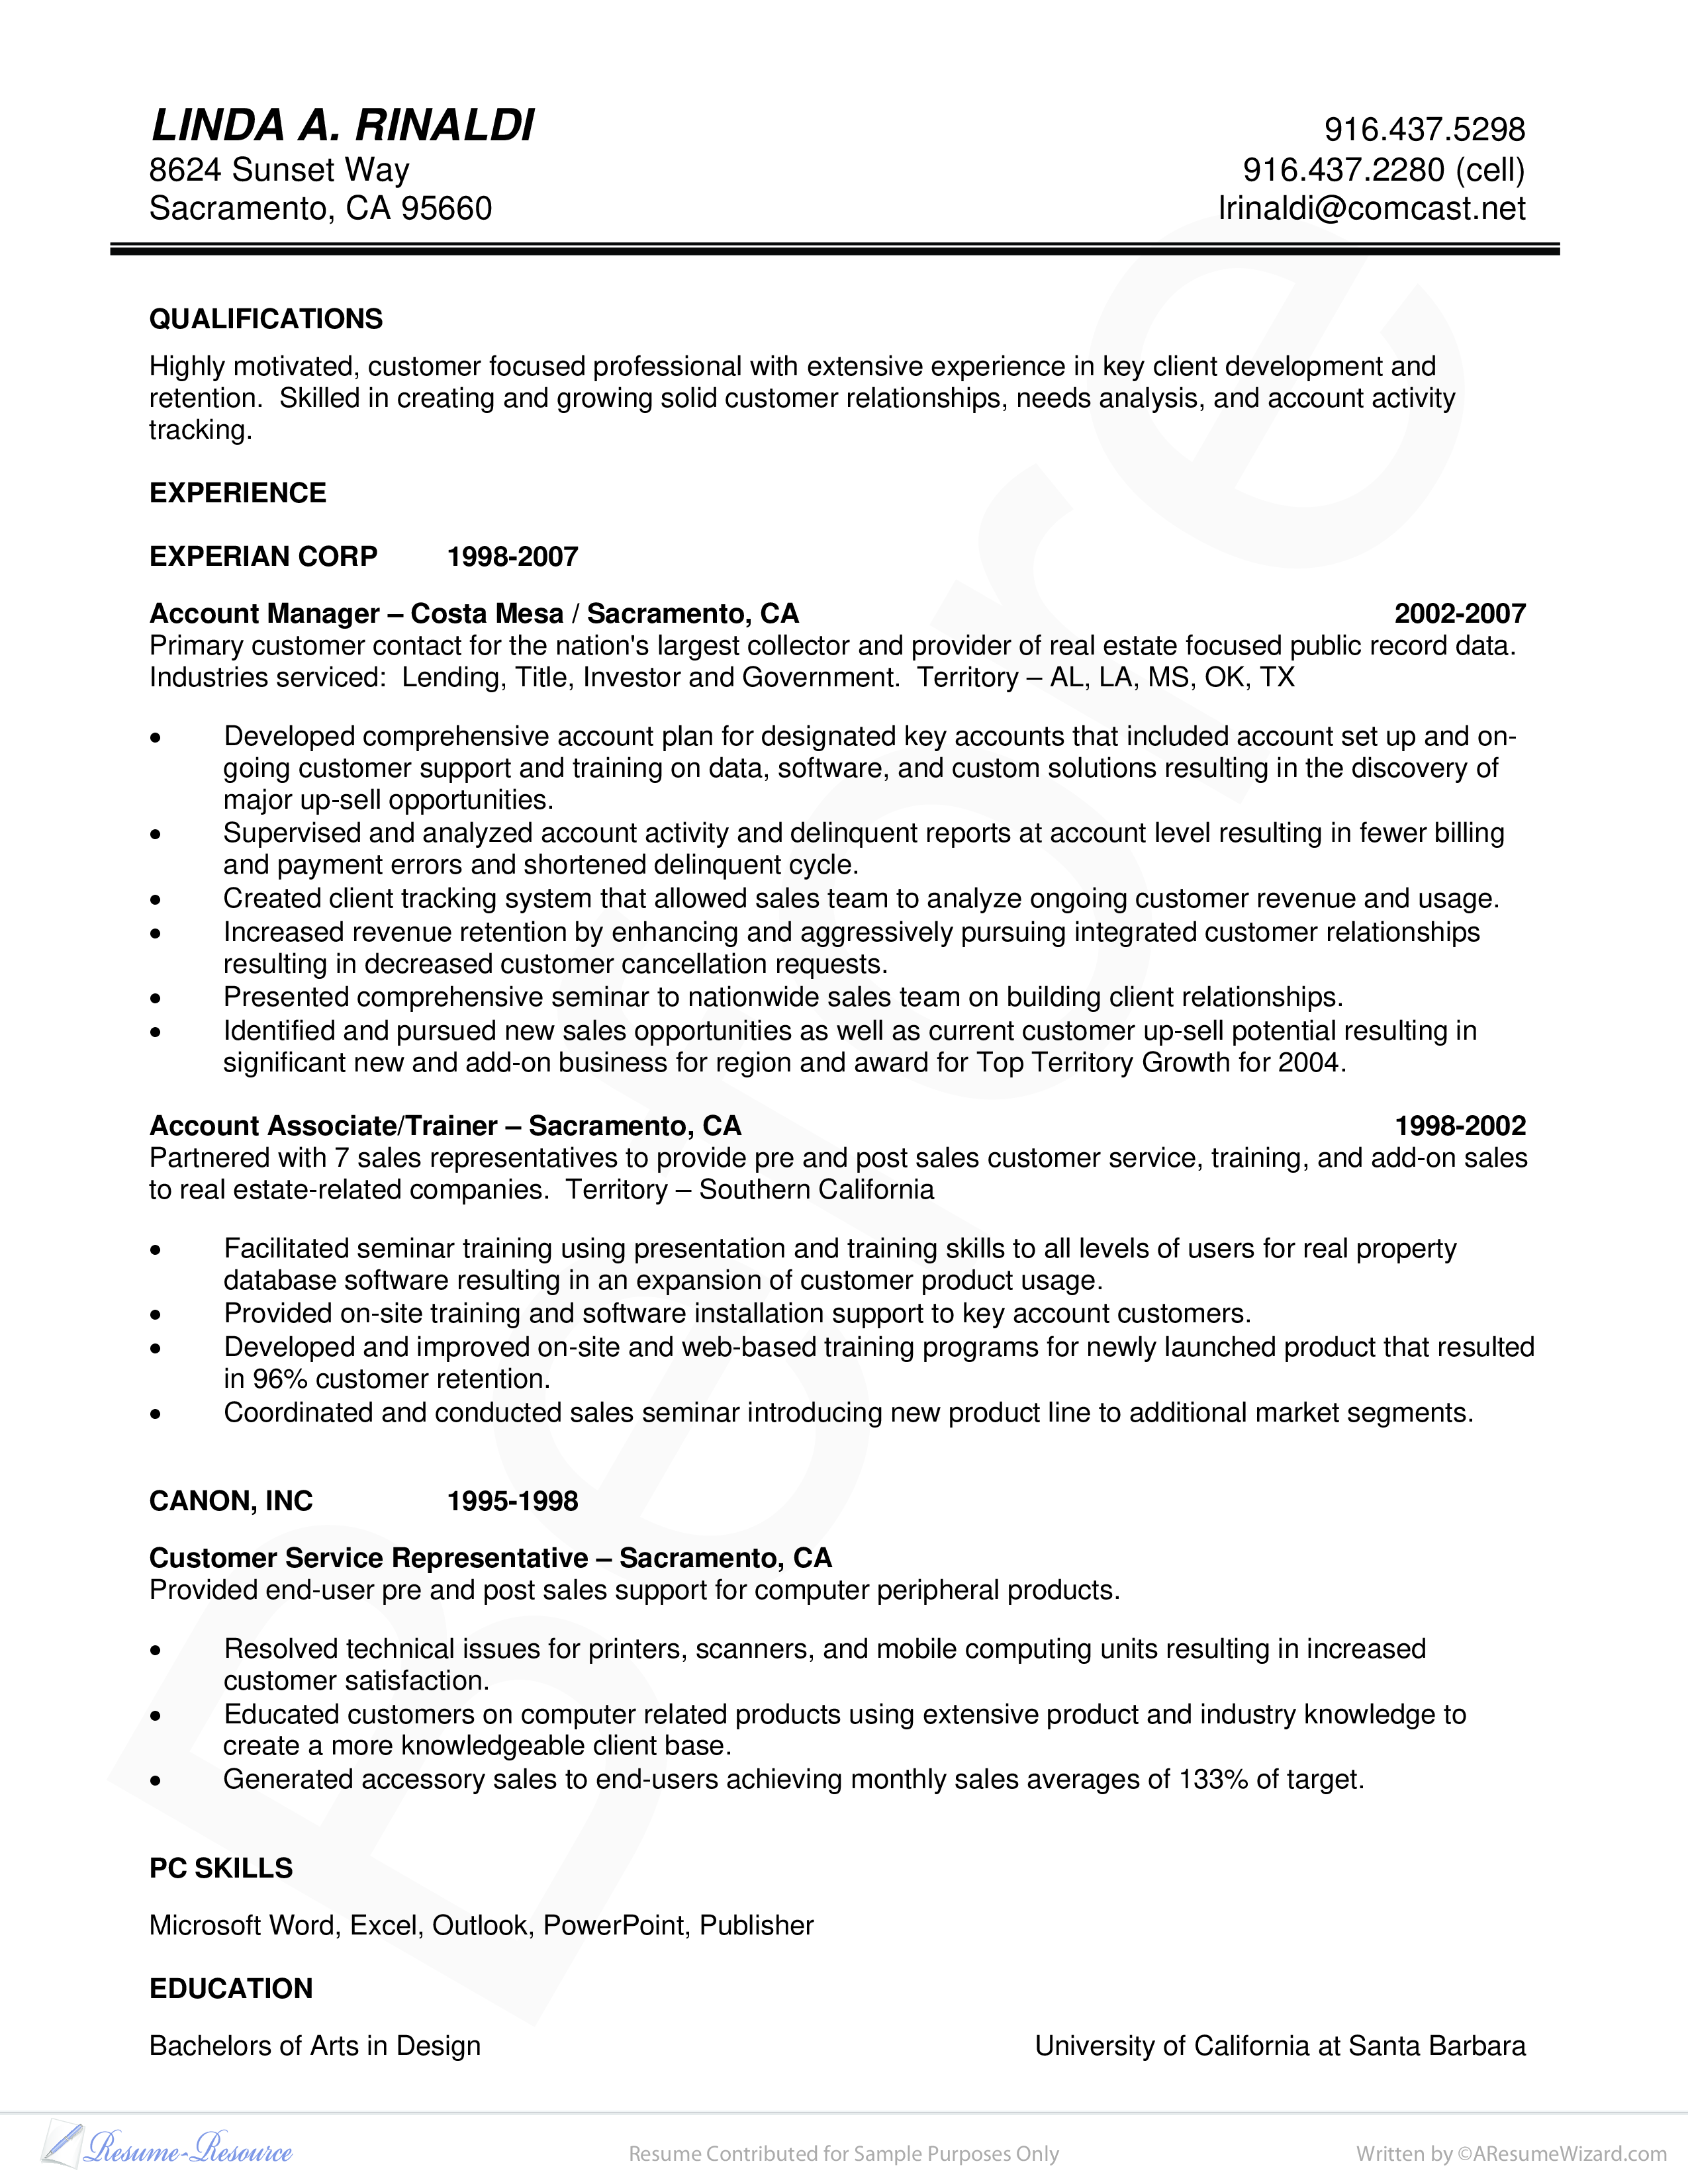 Accounting Manager Curriculum Vitae main image